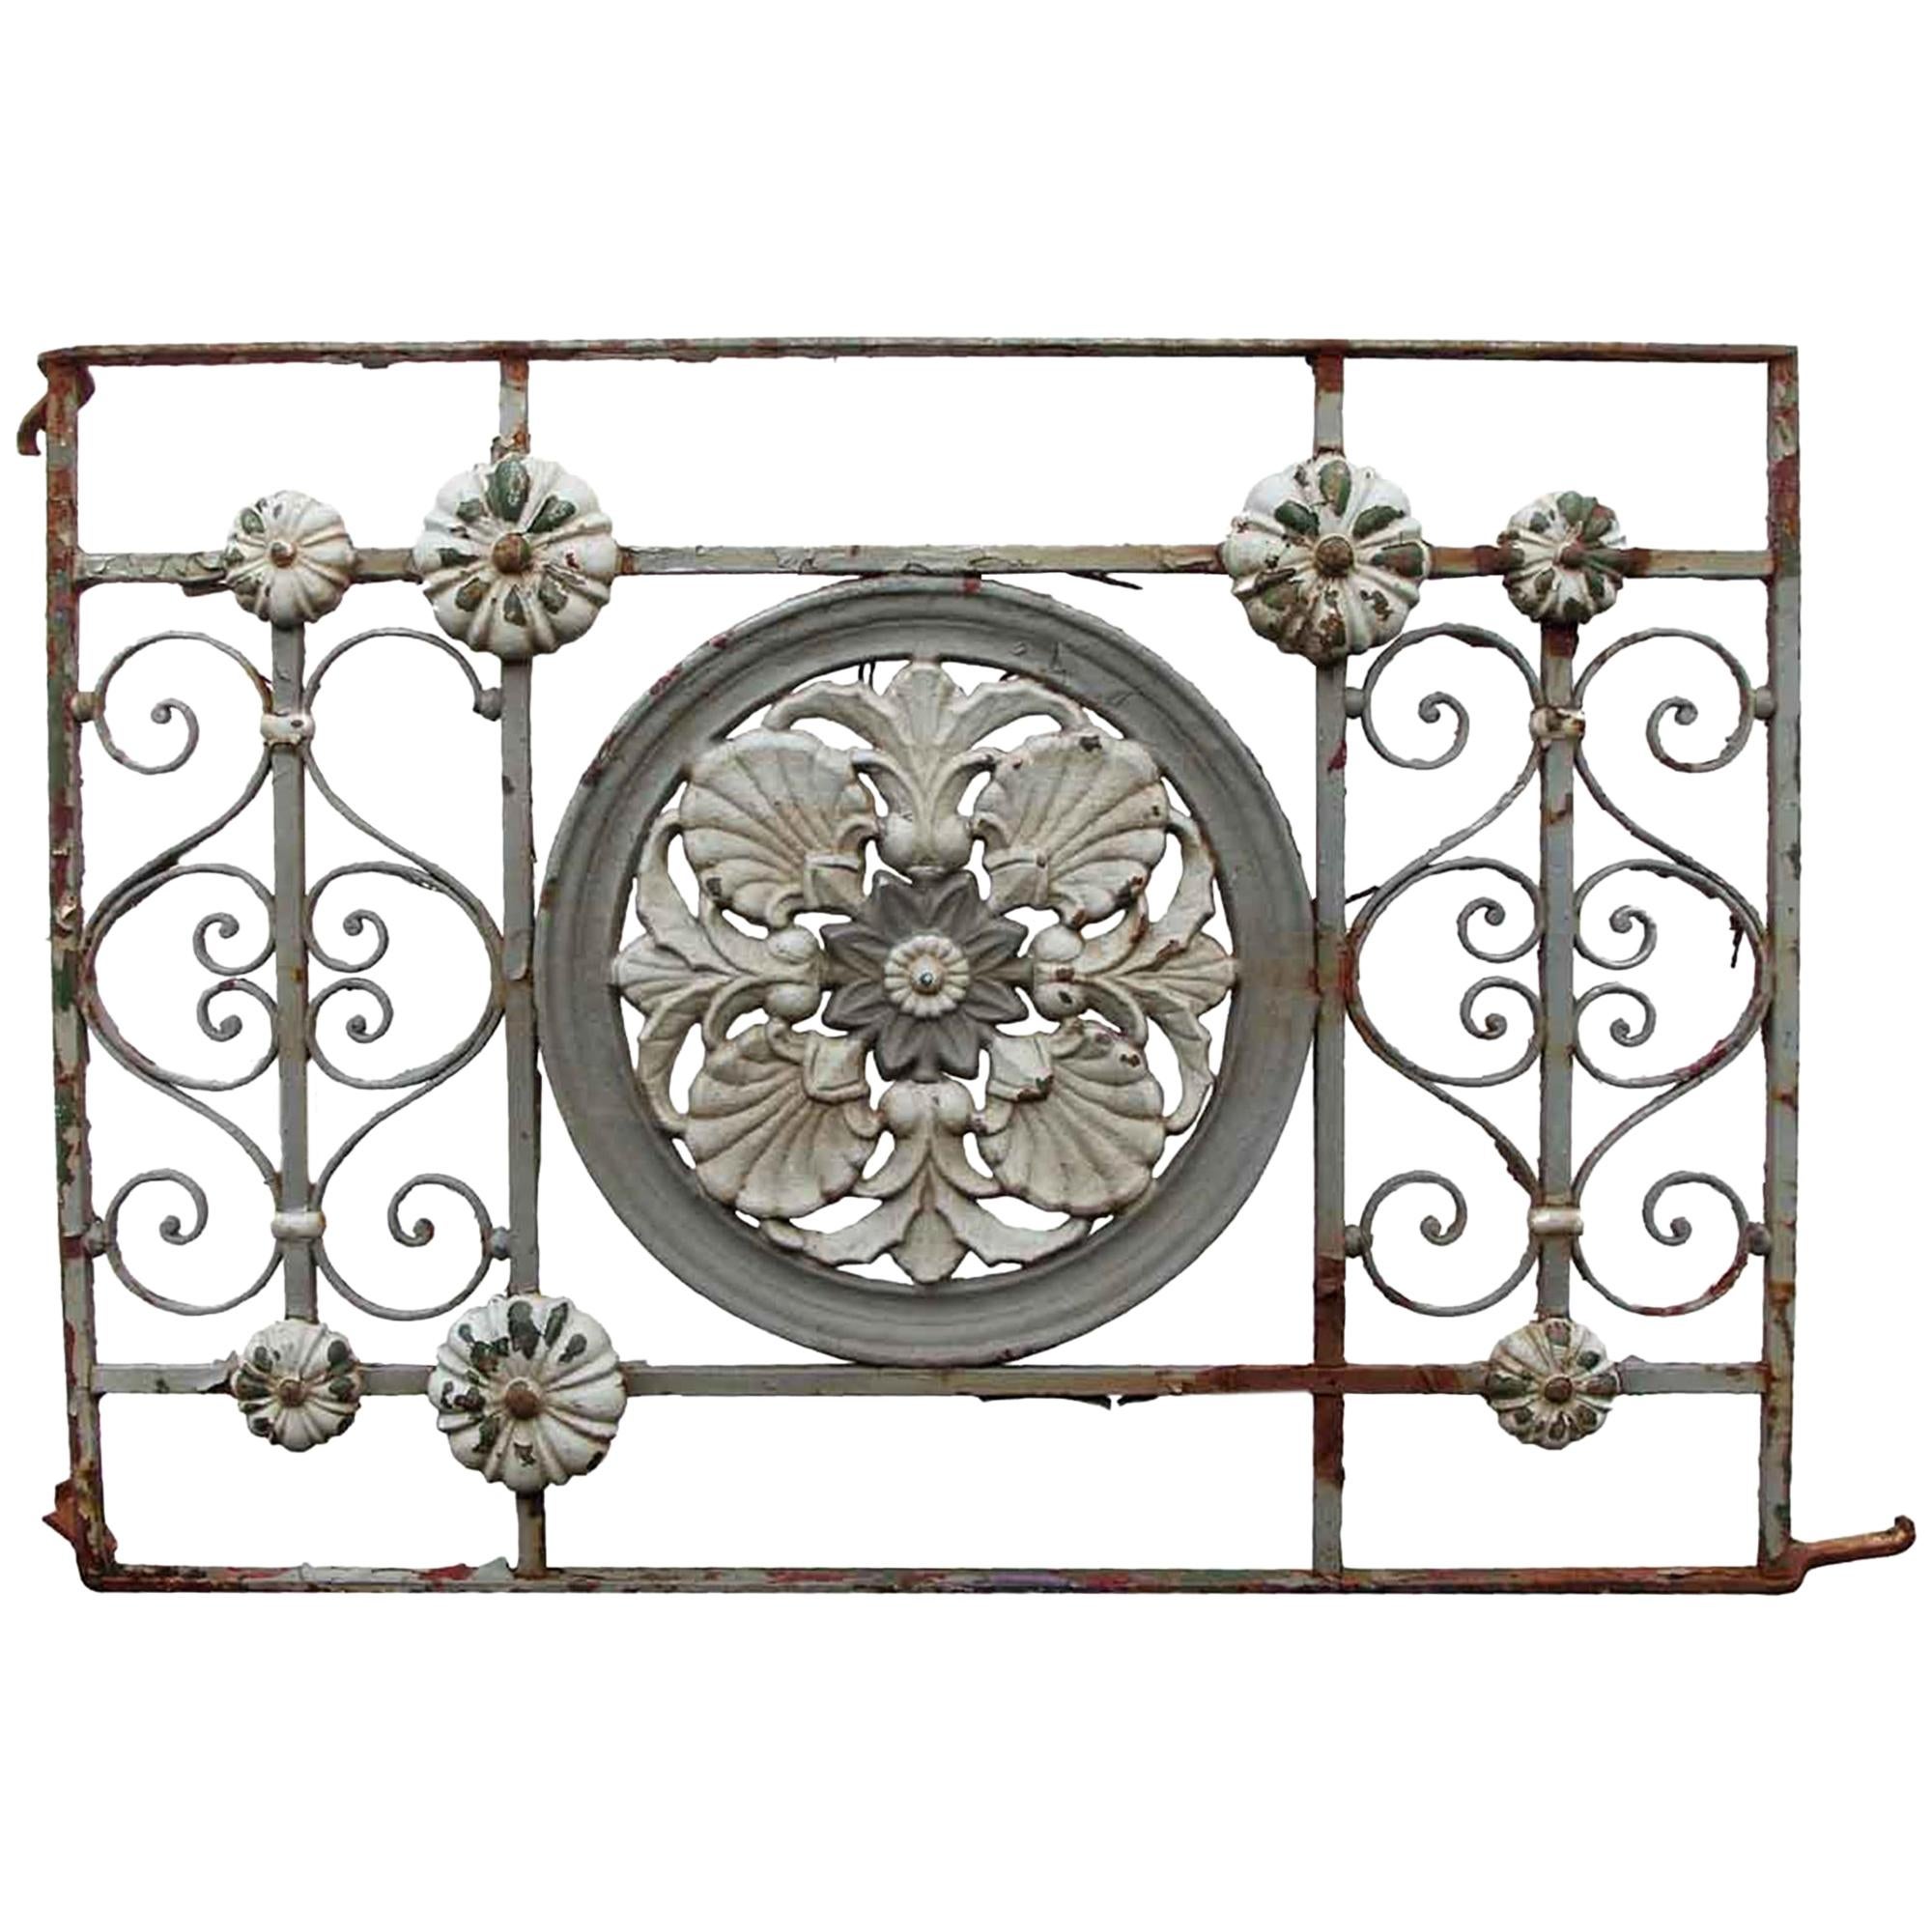 1920s Floral Gray and White Wrought Iron Balcony